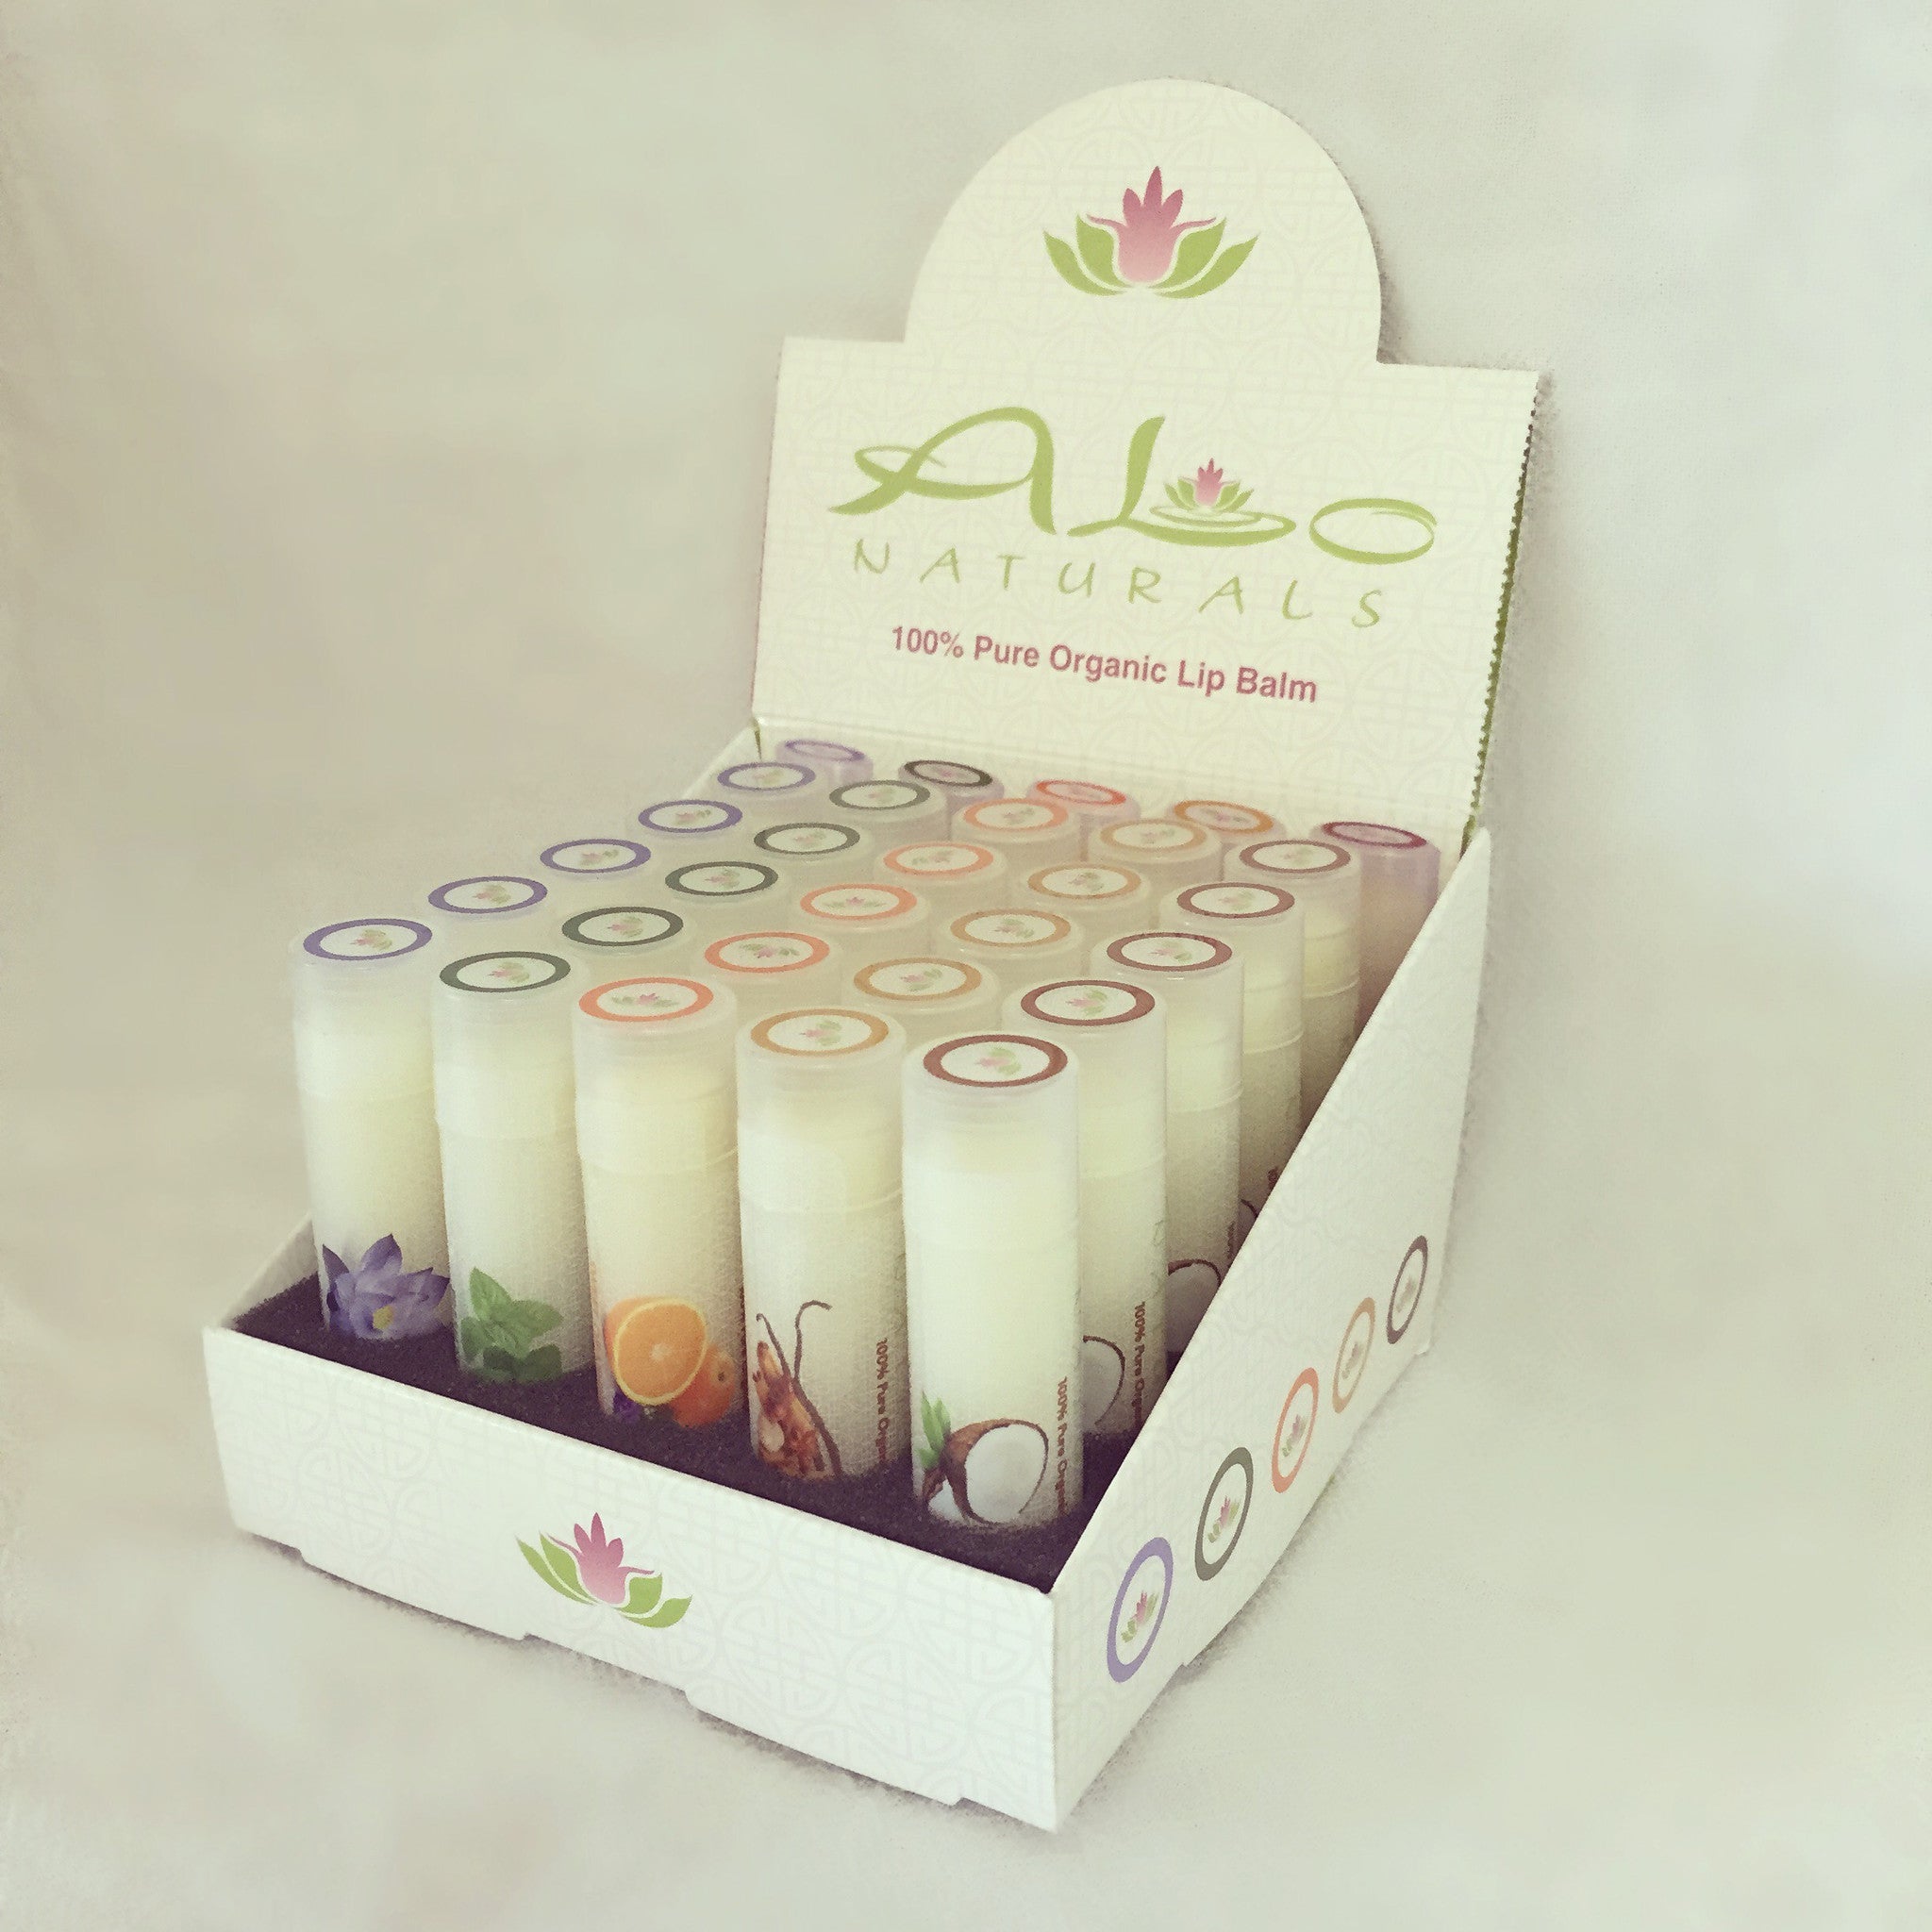 Would you like to carry ALo Naturals in your shop?